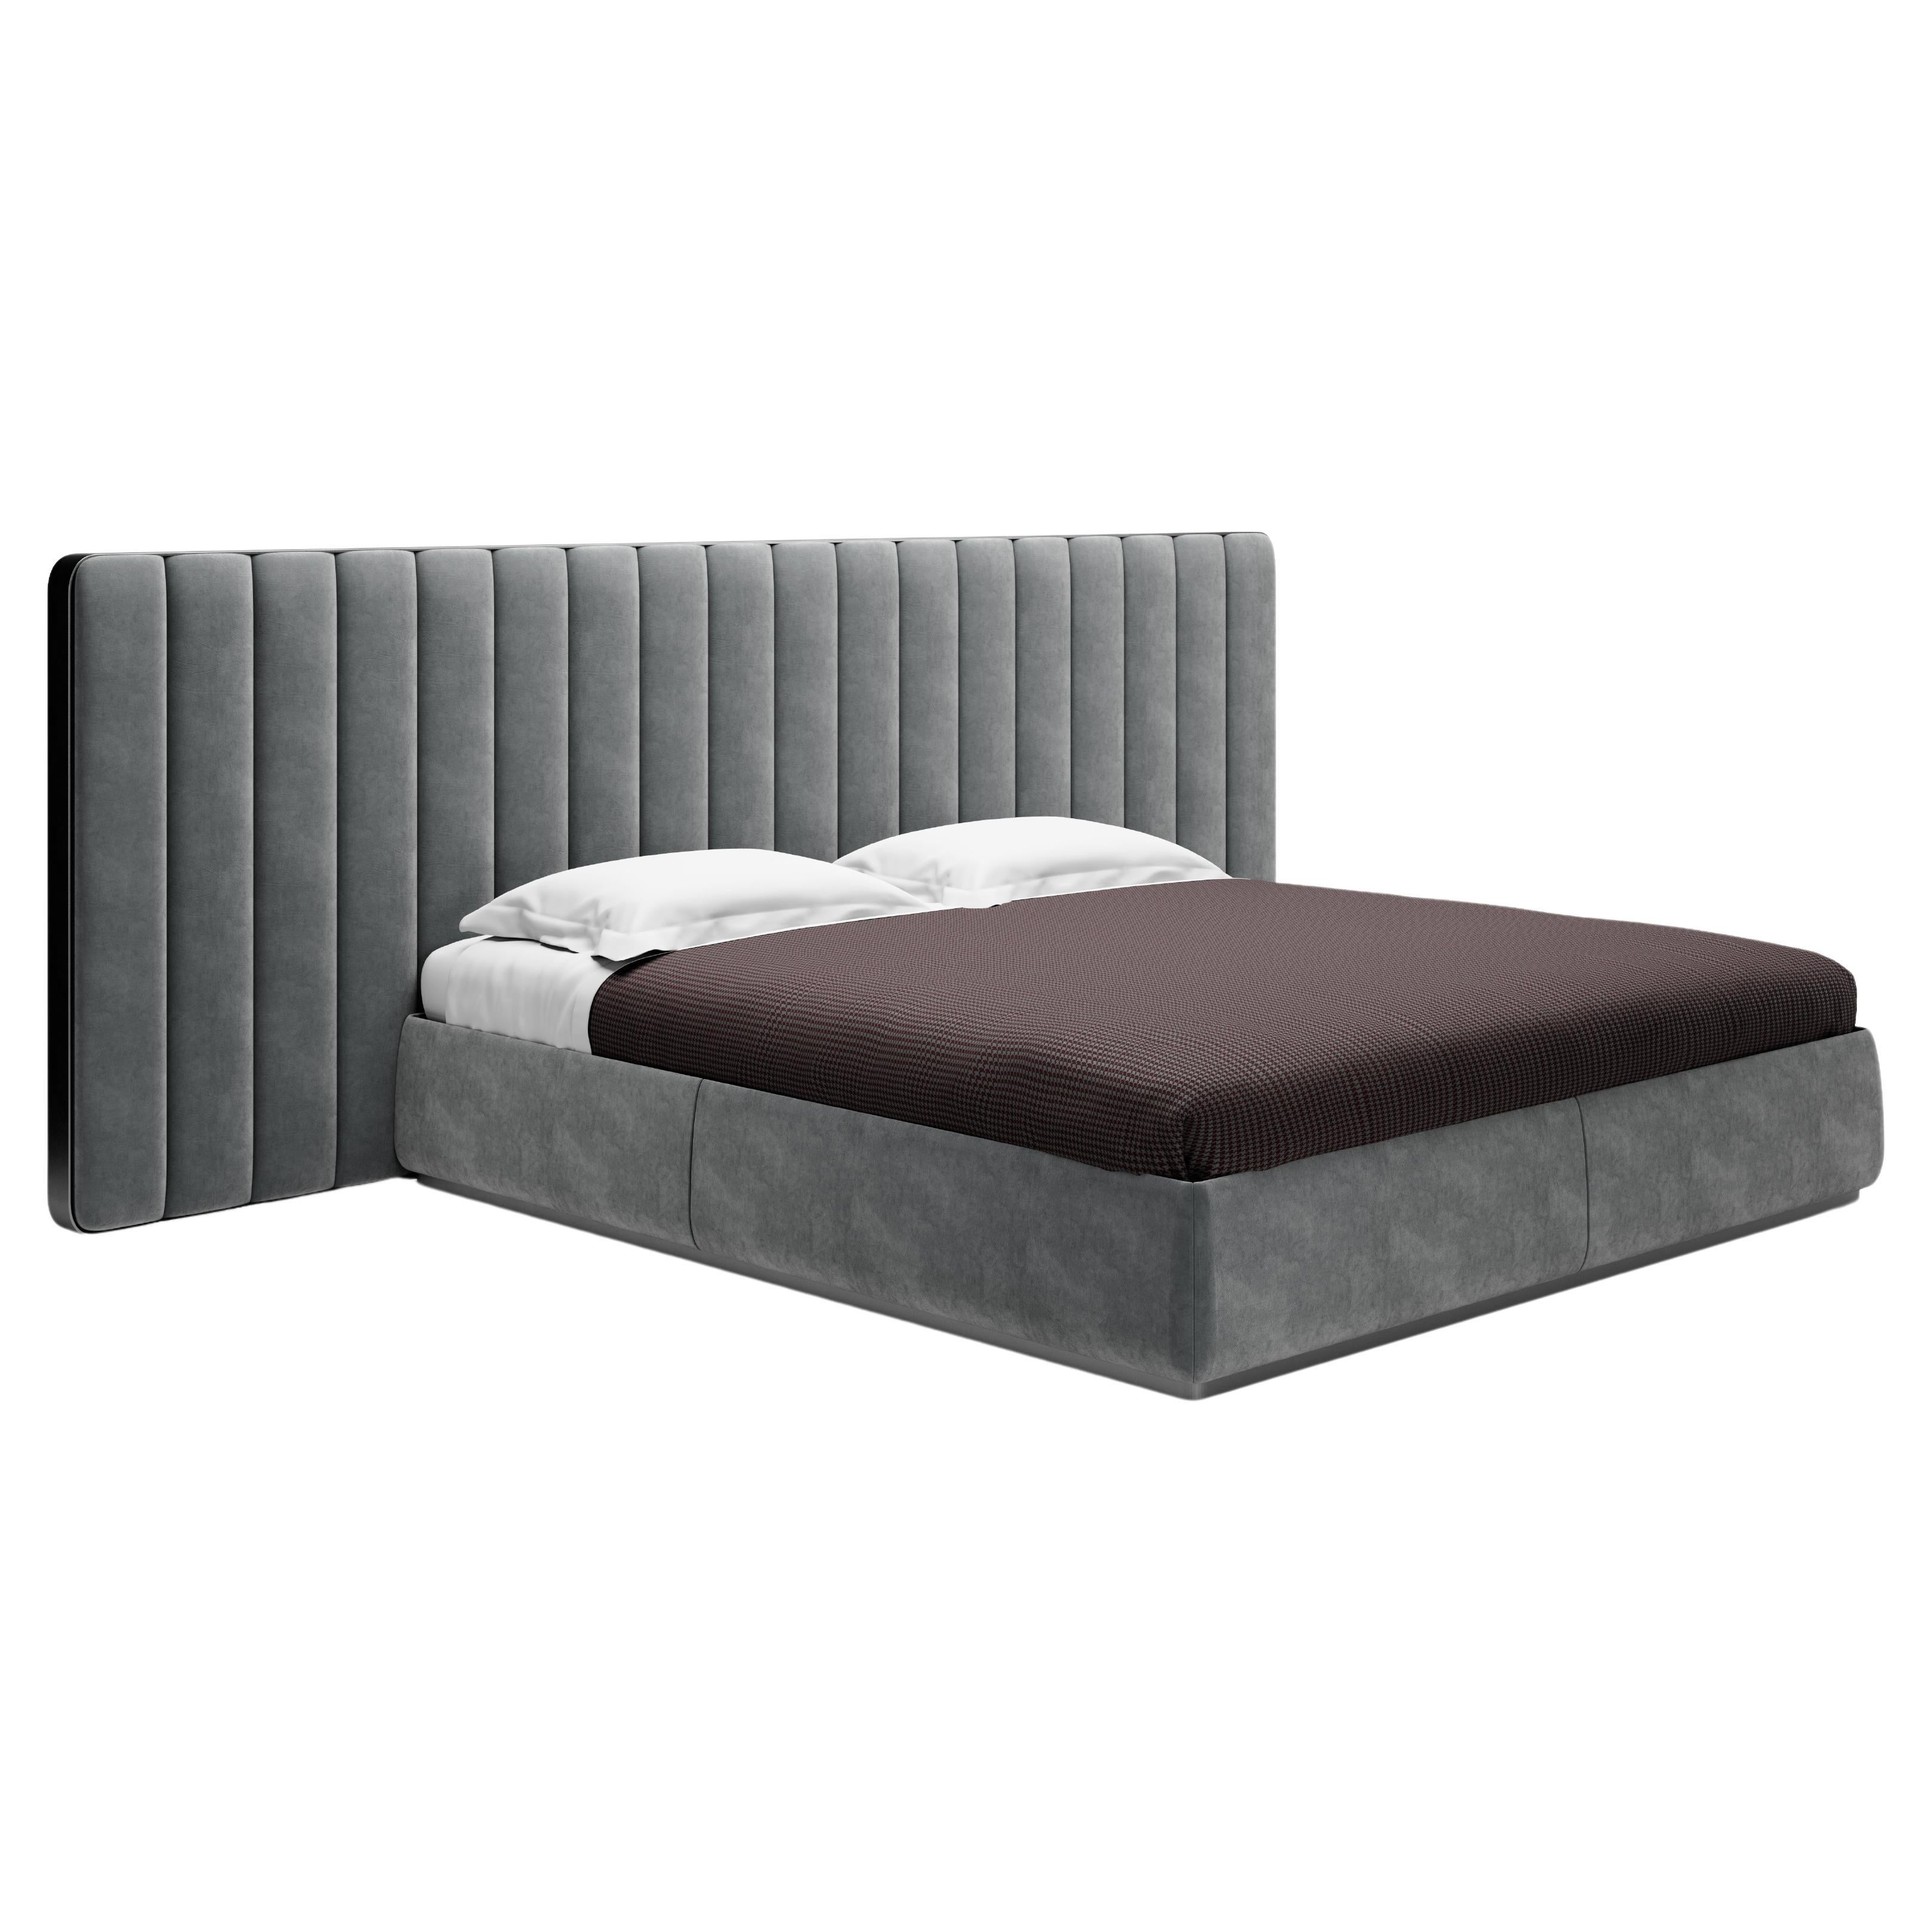 Douglas velvet double bed with upholstered head and one-movement bed base